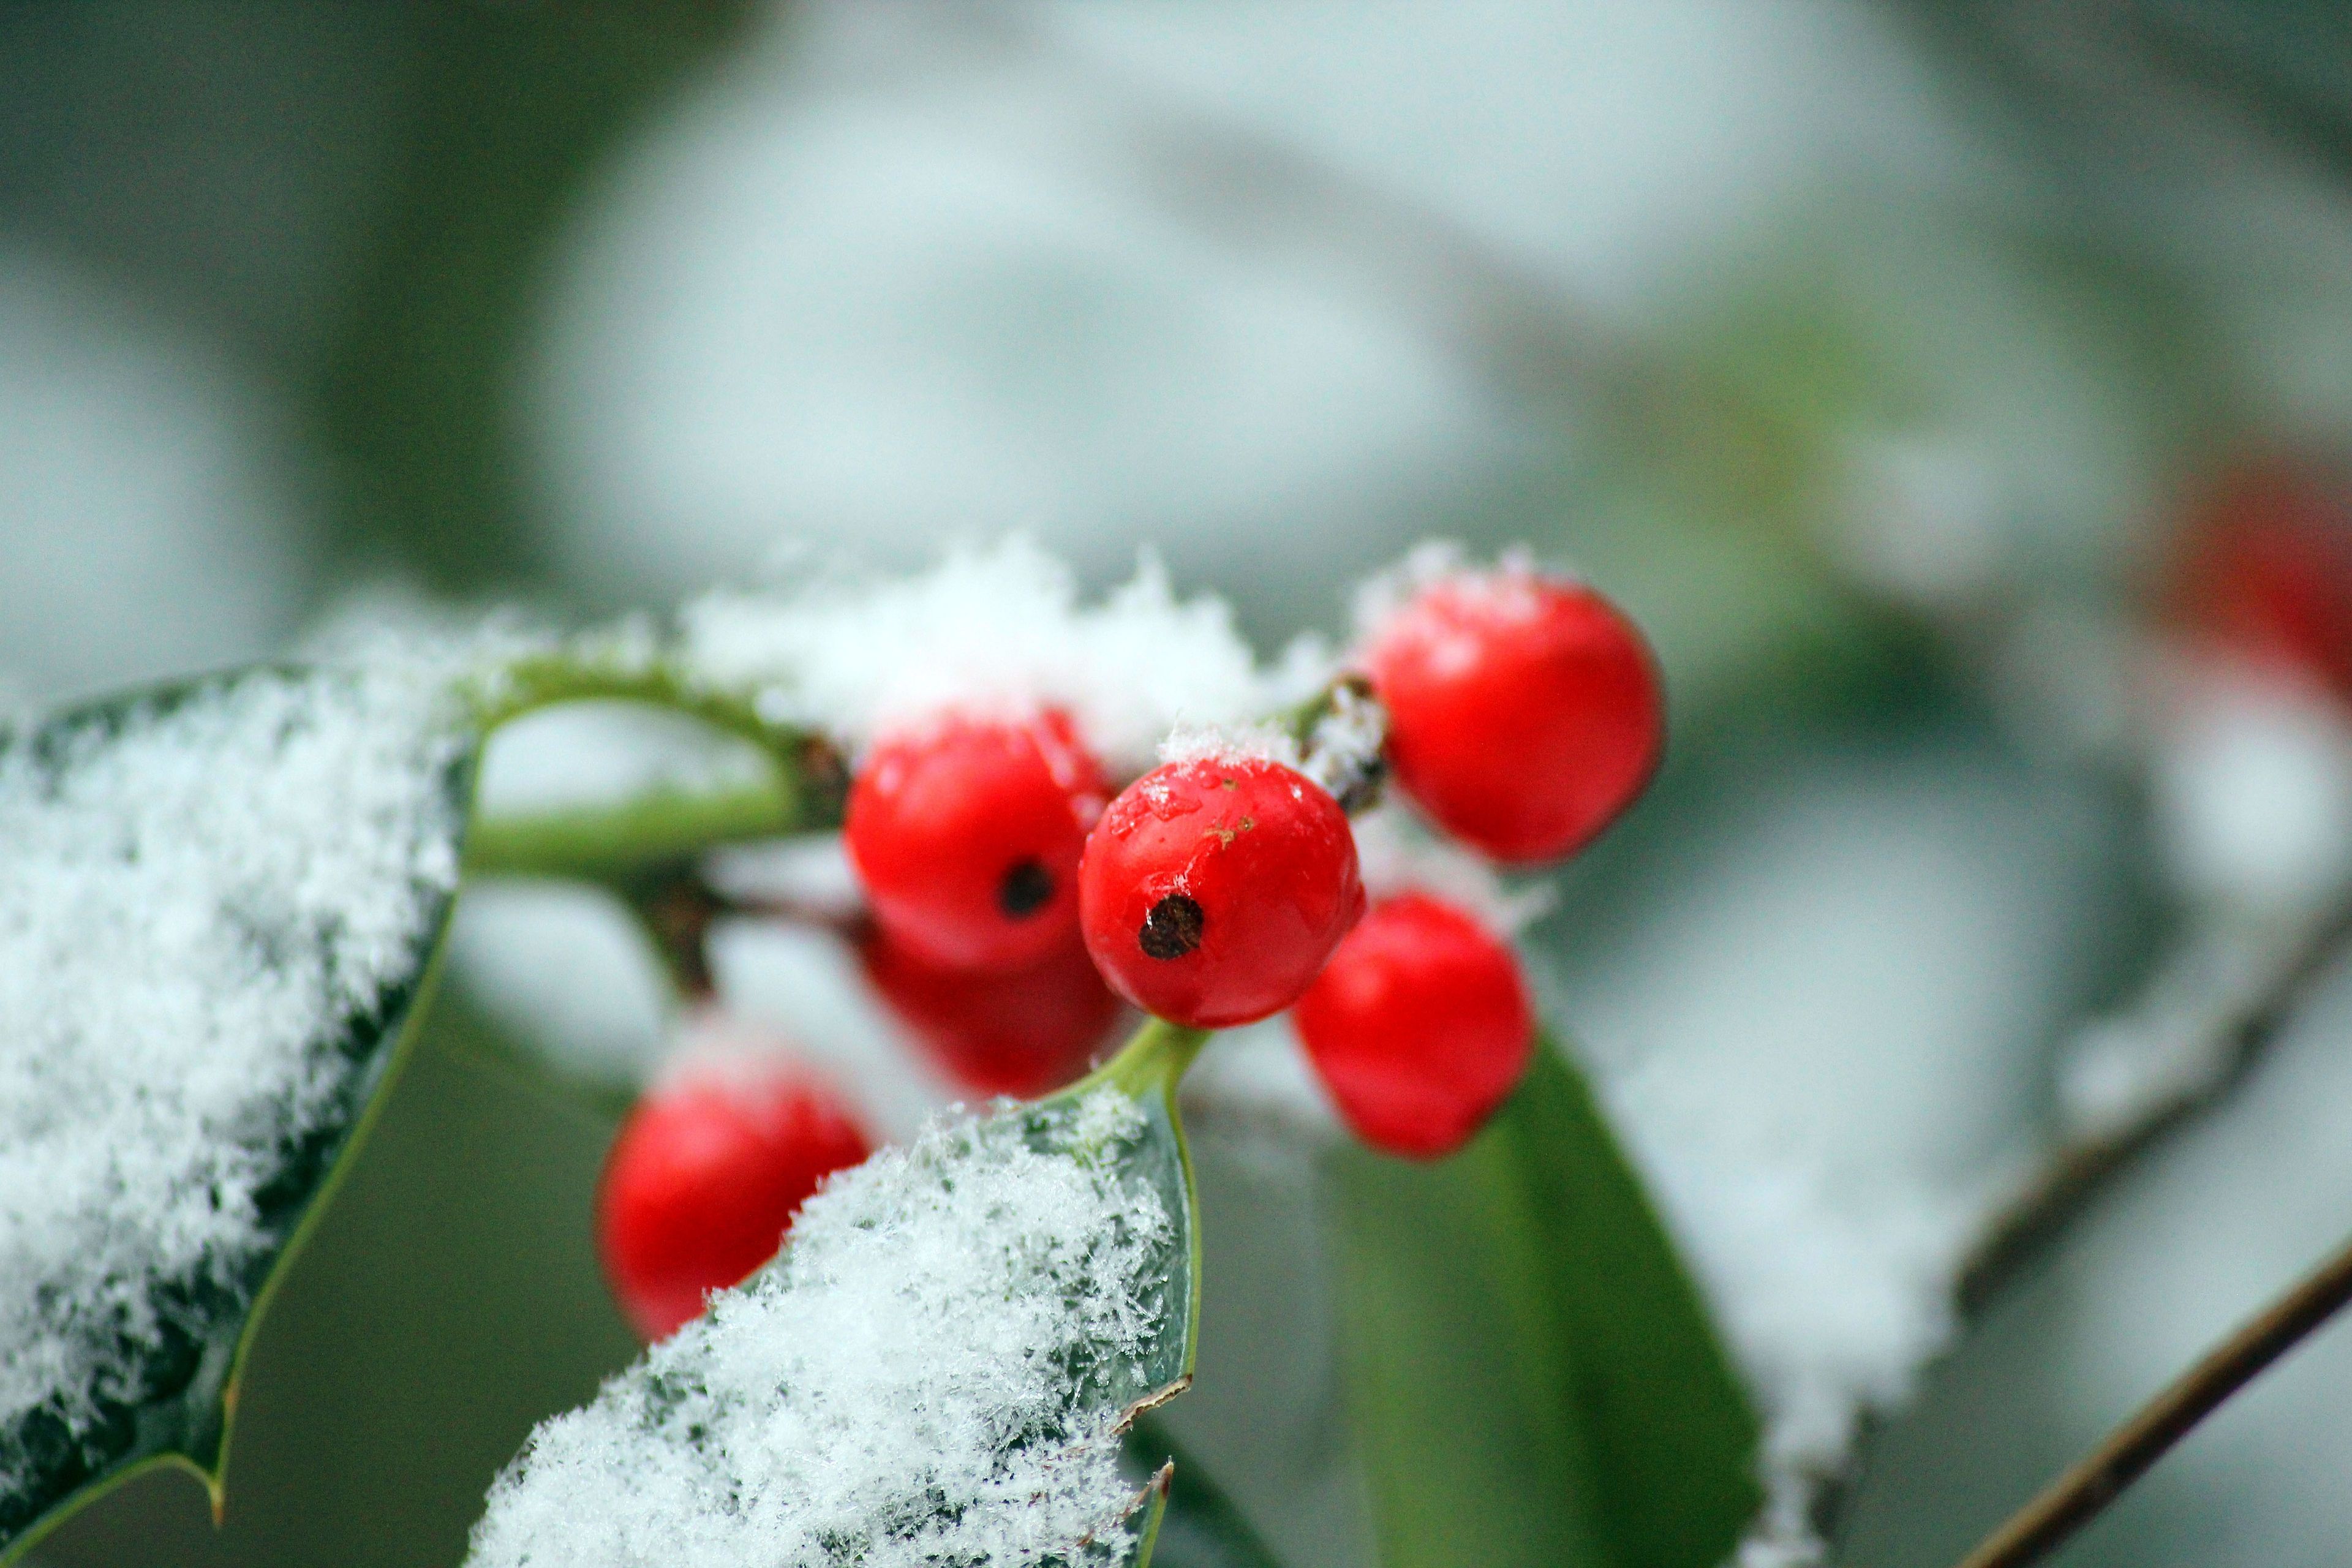 Several red berries on a green bush covered in snow.